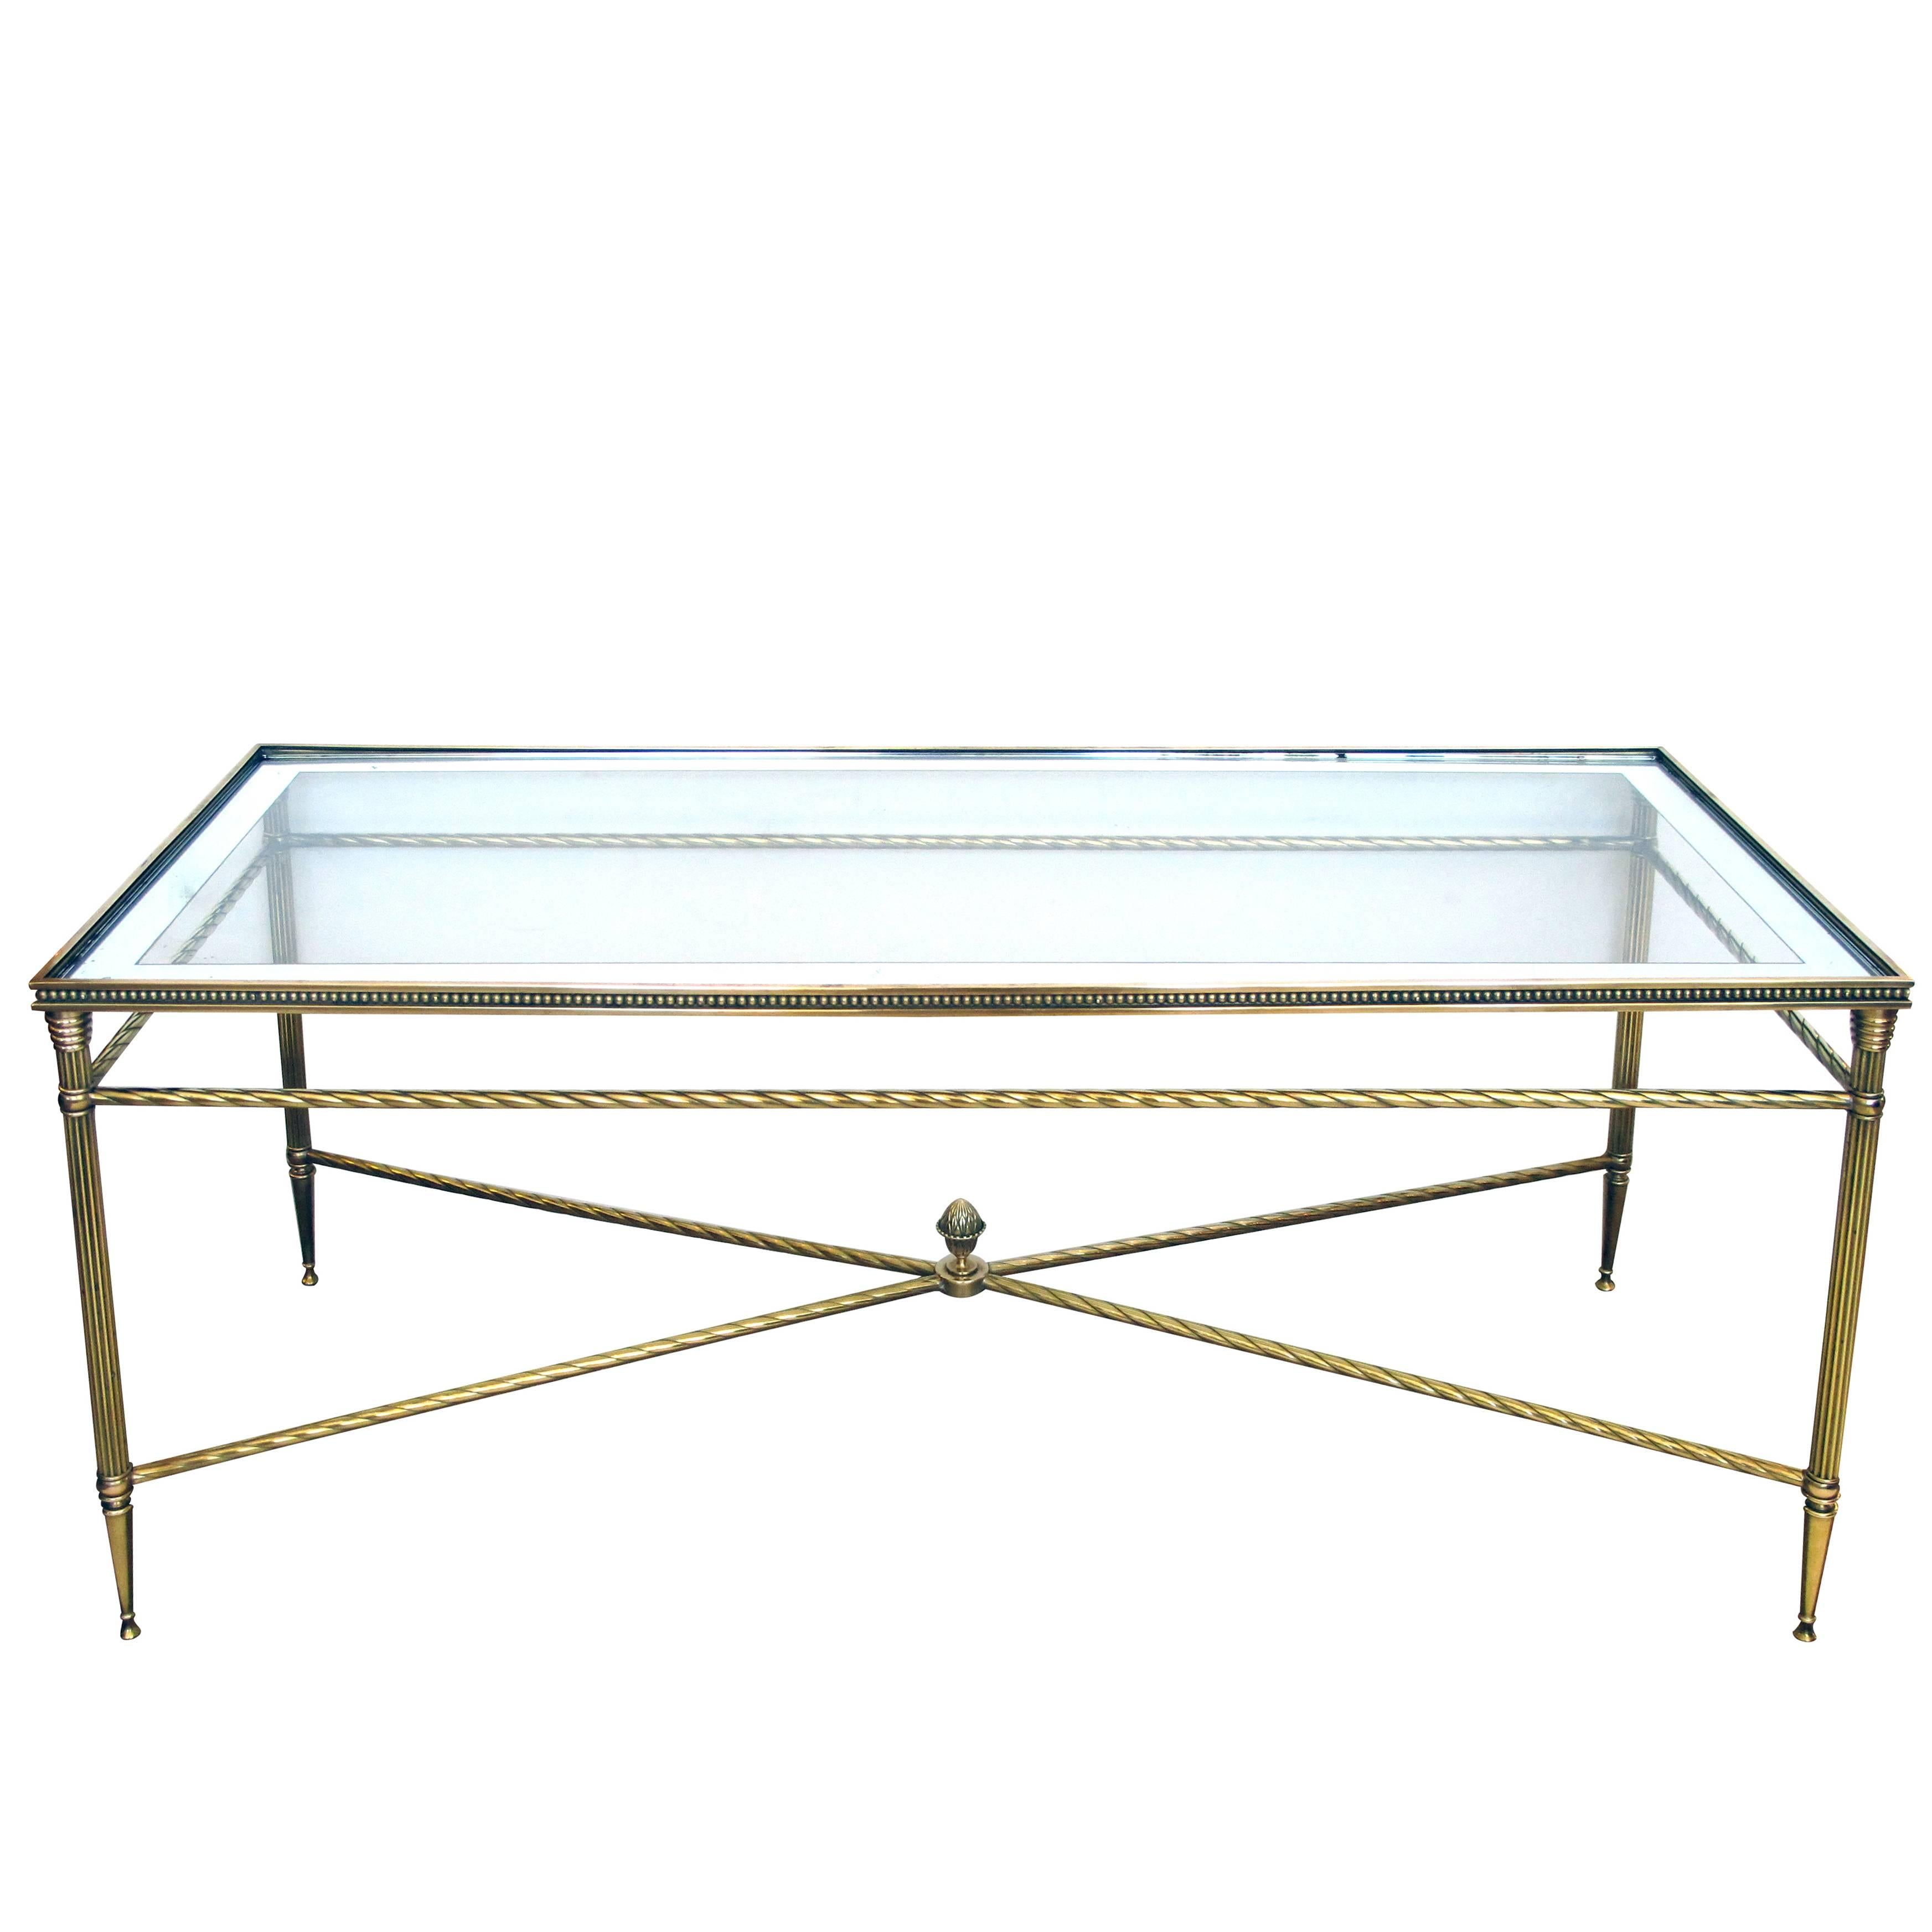 Good Quality French Mid-Century Neoclassical Style Brass Coffee Table